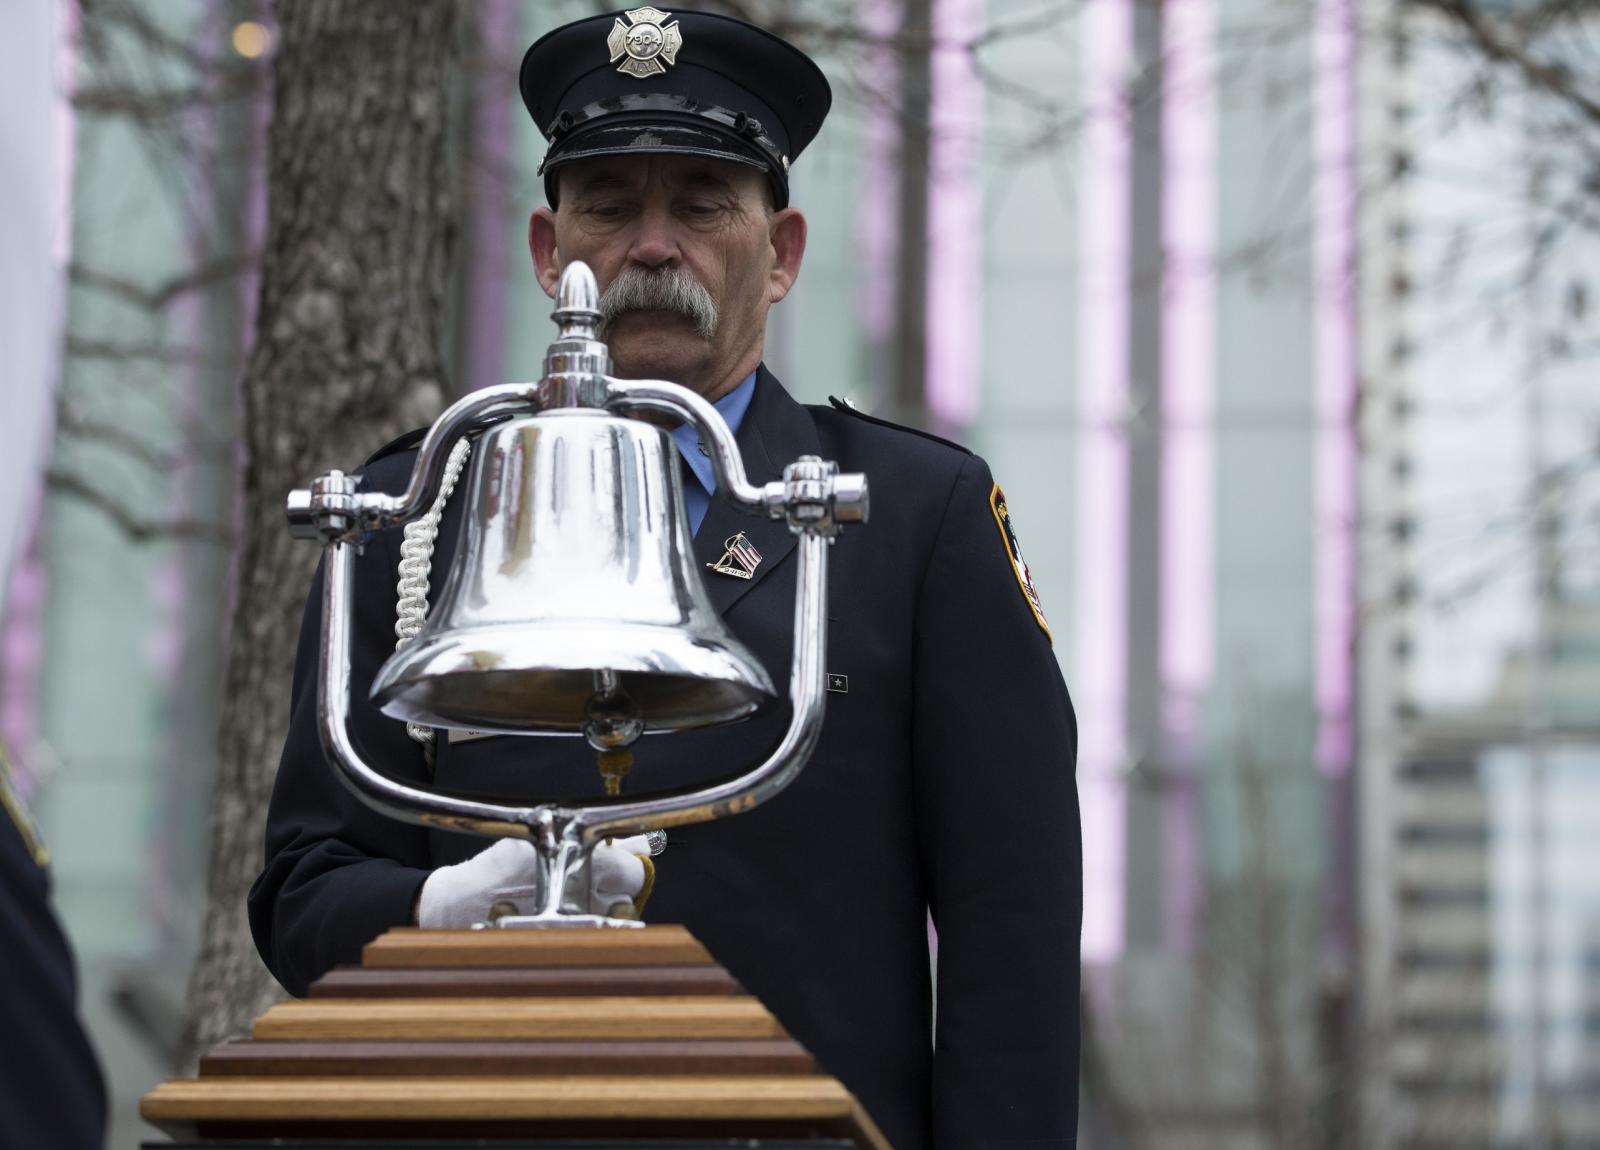 A mustachioed firefighter in a formal FDNY outfit rings a silver bell, marking the time the World Trade Center was bombed on February 26, 1993.